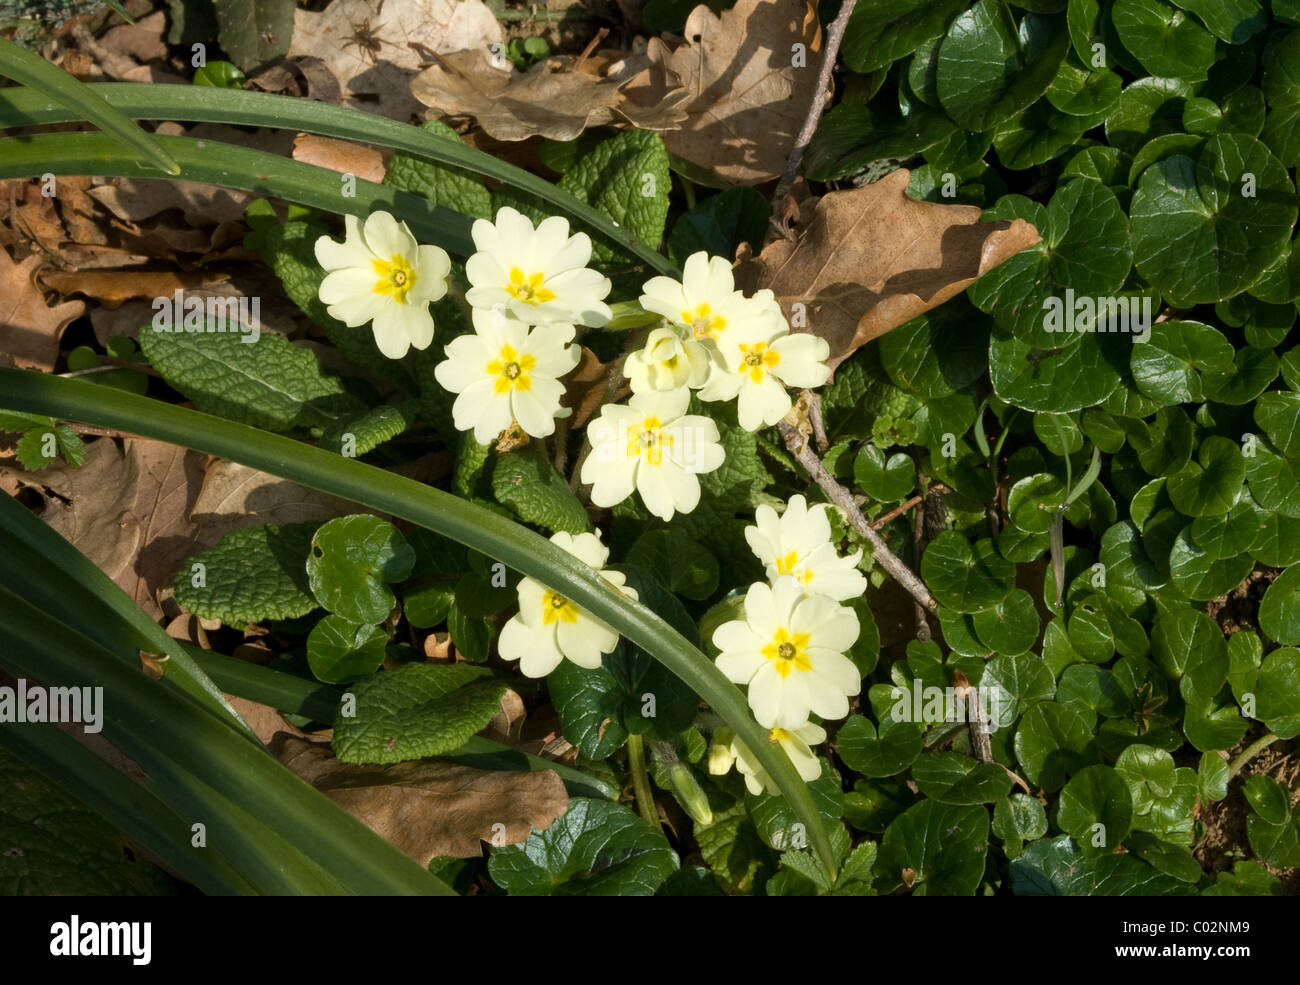 Yellow primrose peeping out of a bed of winter leaves. Spring is on its way. Stock Photo